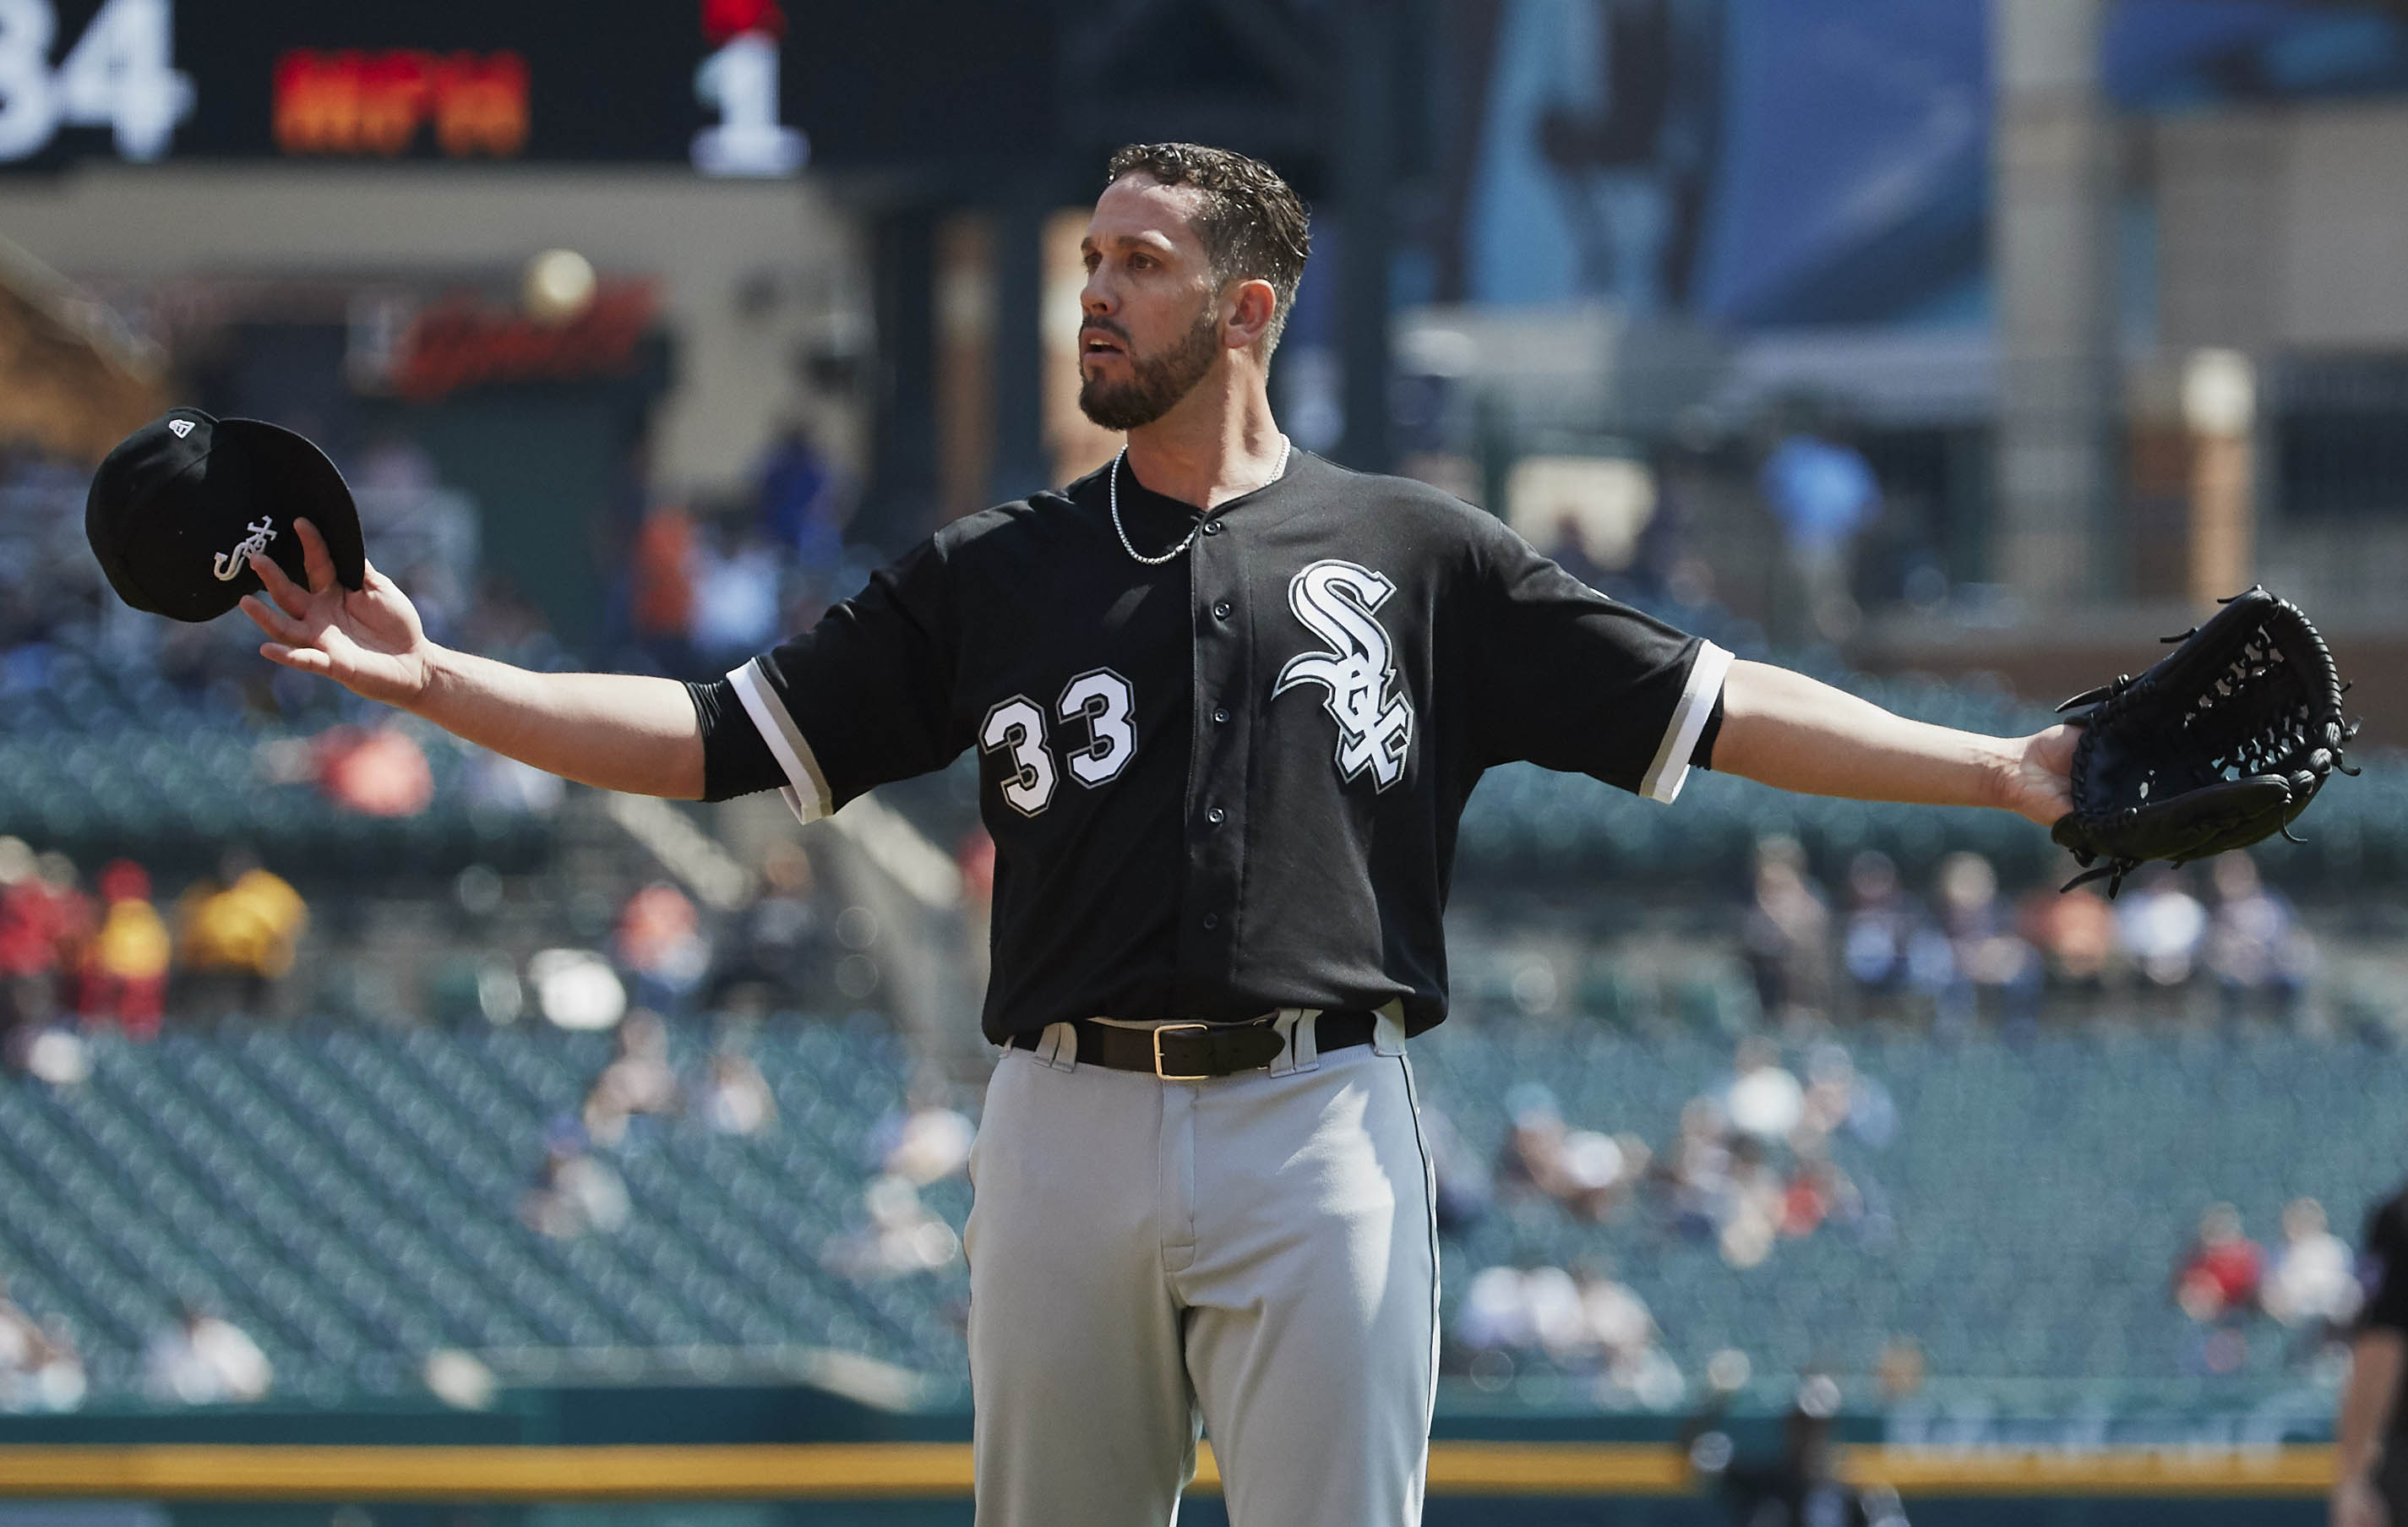 Sep 14, 2017; Detroit, MI, USA; Chicago White Sox starting pitcher James Shields (33) reacts to a play in the first inning against the Detroit Tigers at Comerica Park. Mandatory Credit: Rick Osentoski-USA TODAY Sports